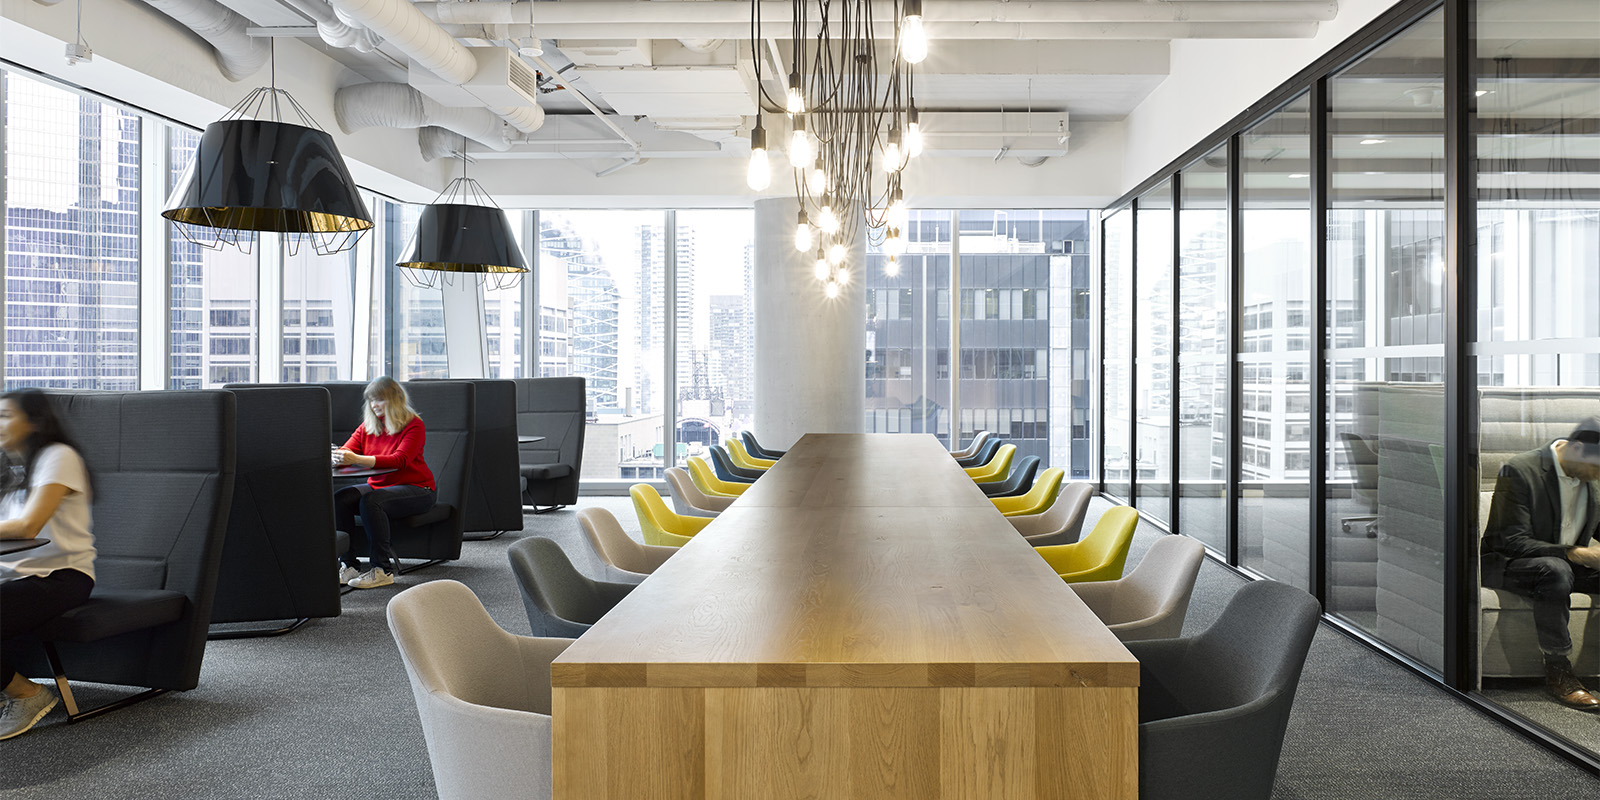 OMERS office shared space with conference table, upholstered chairs, and industrial lighting